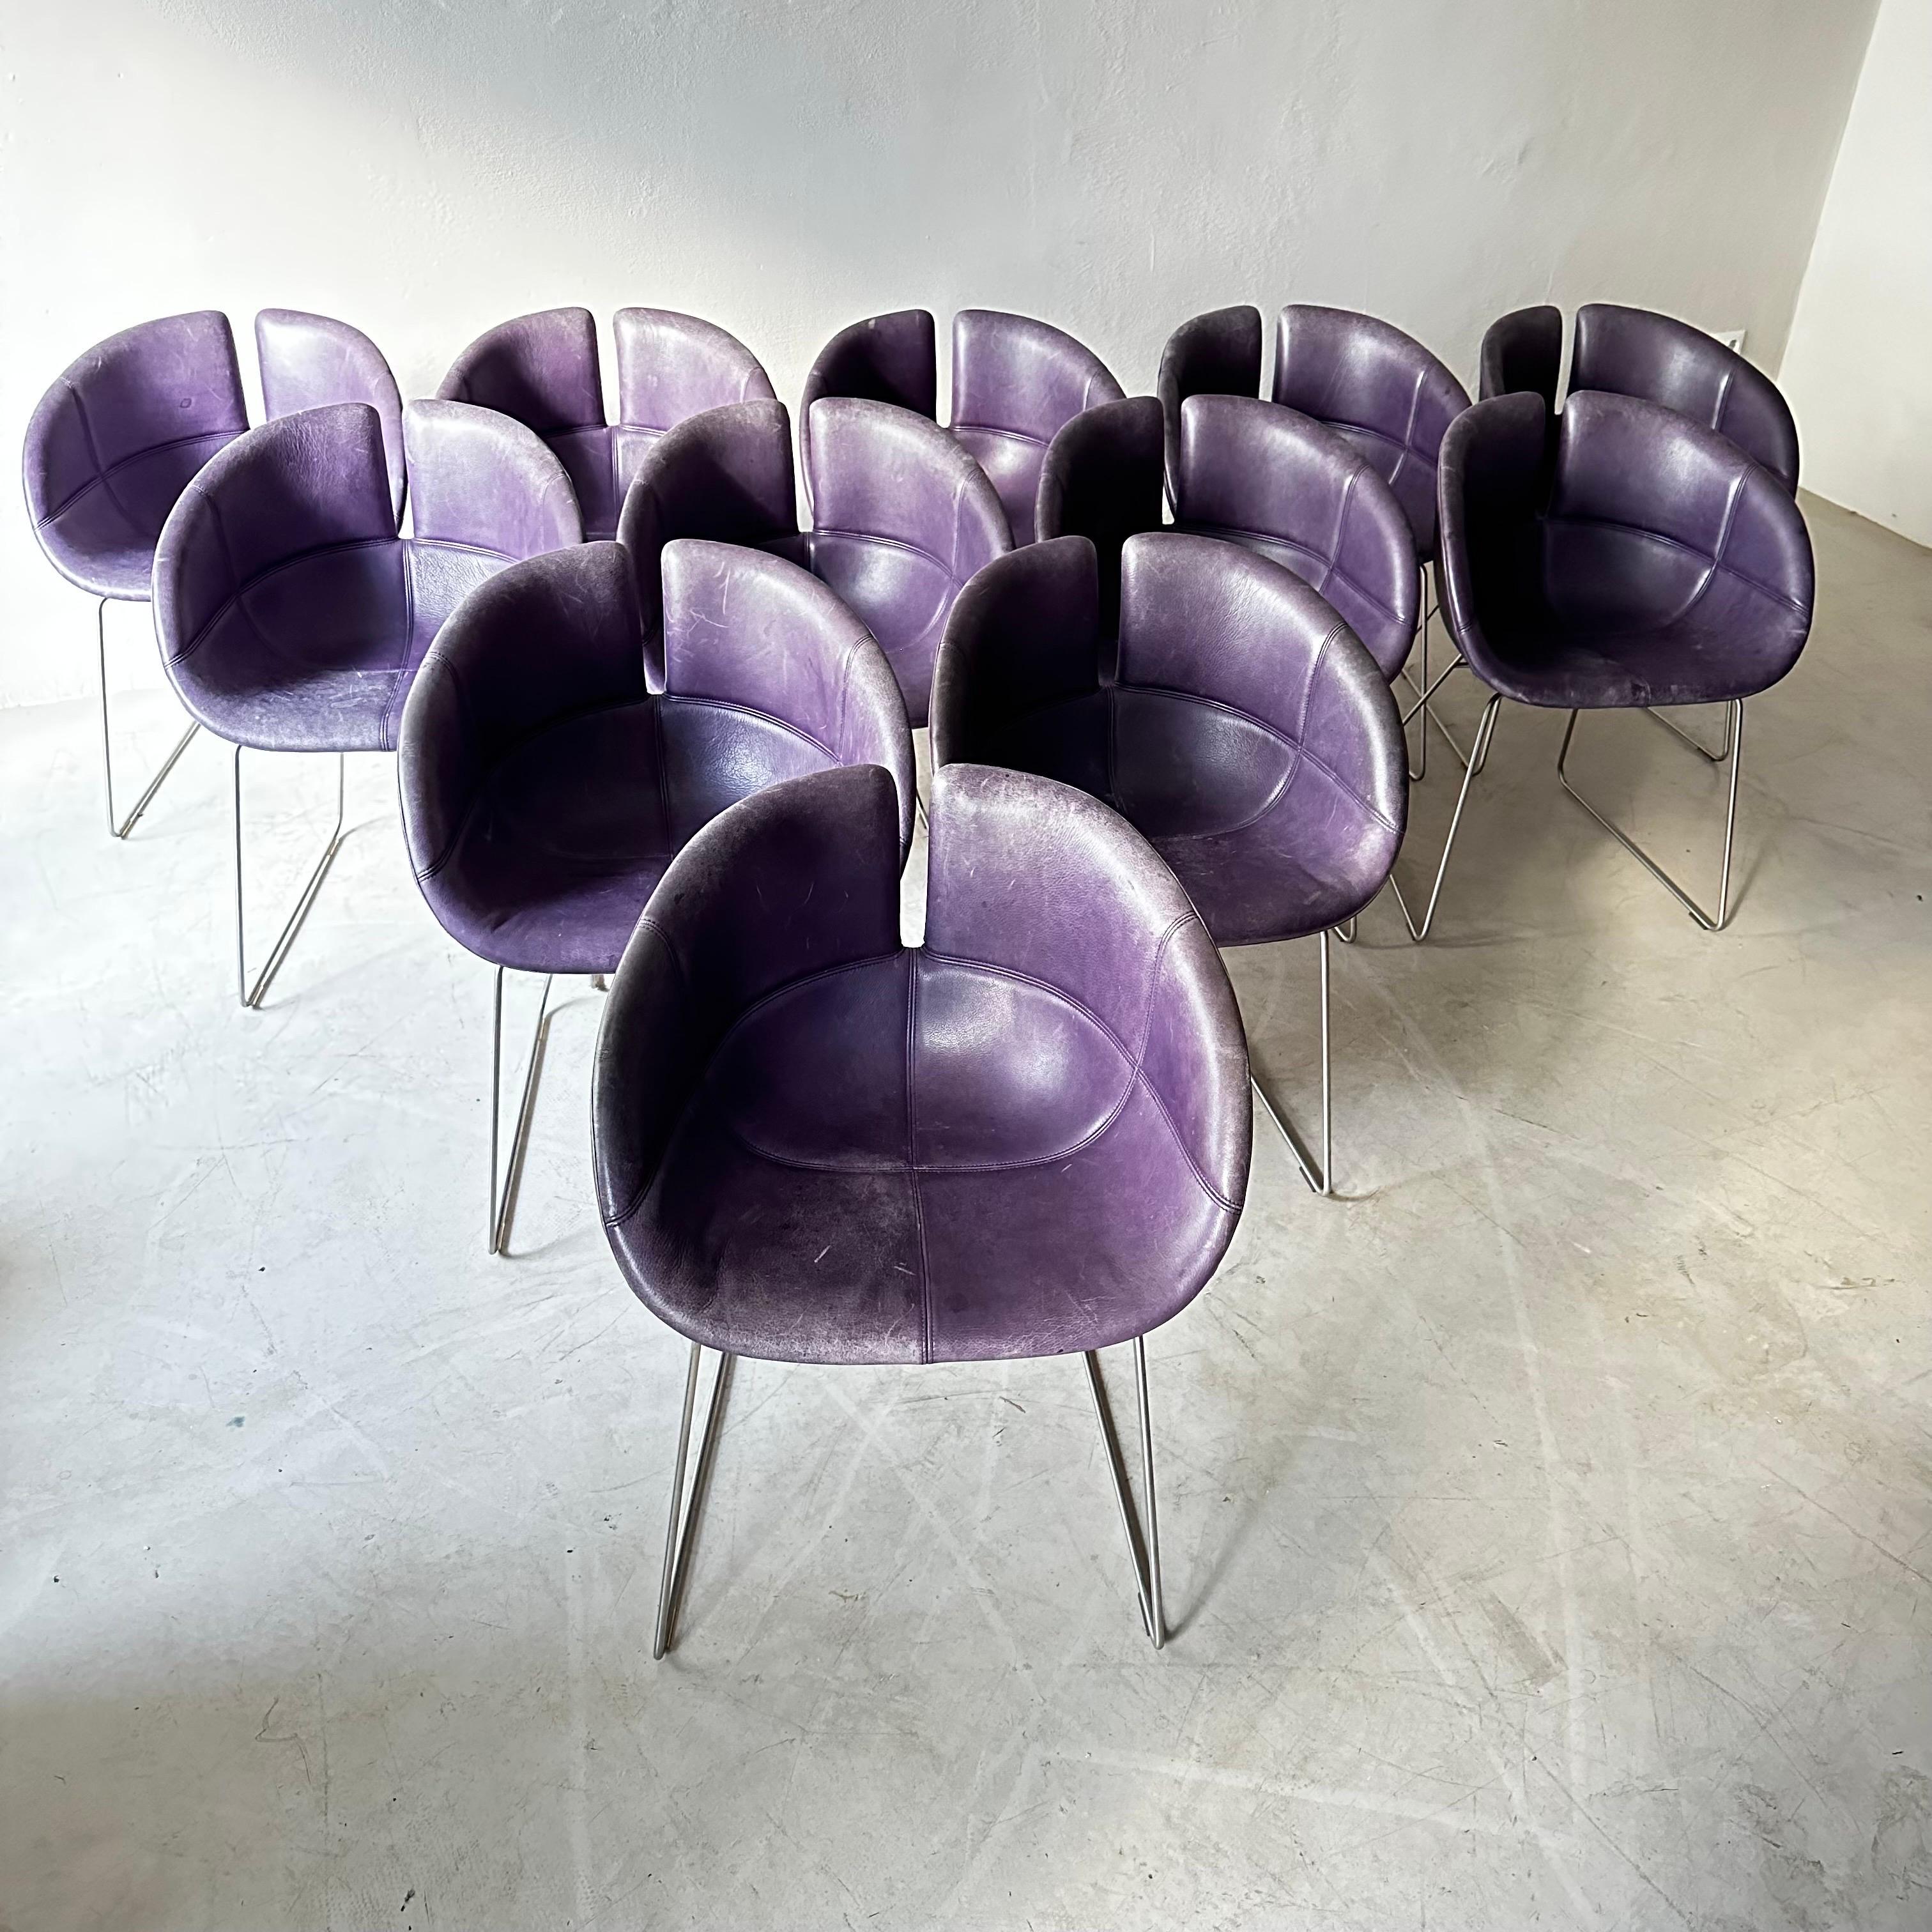 Italian Set of 12 Moroso Dining Chairs in Purple Leather by Patricia Urquiola 2002 For Sale